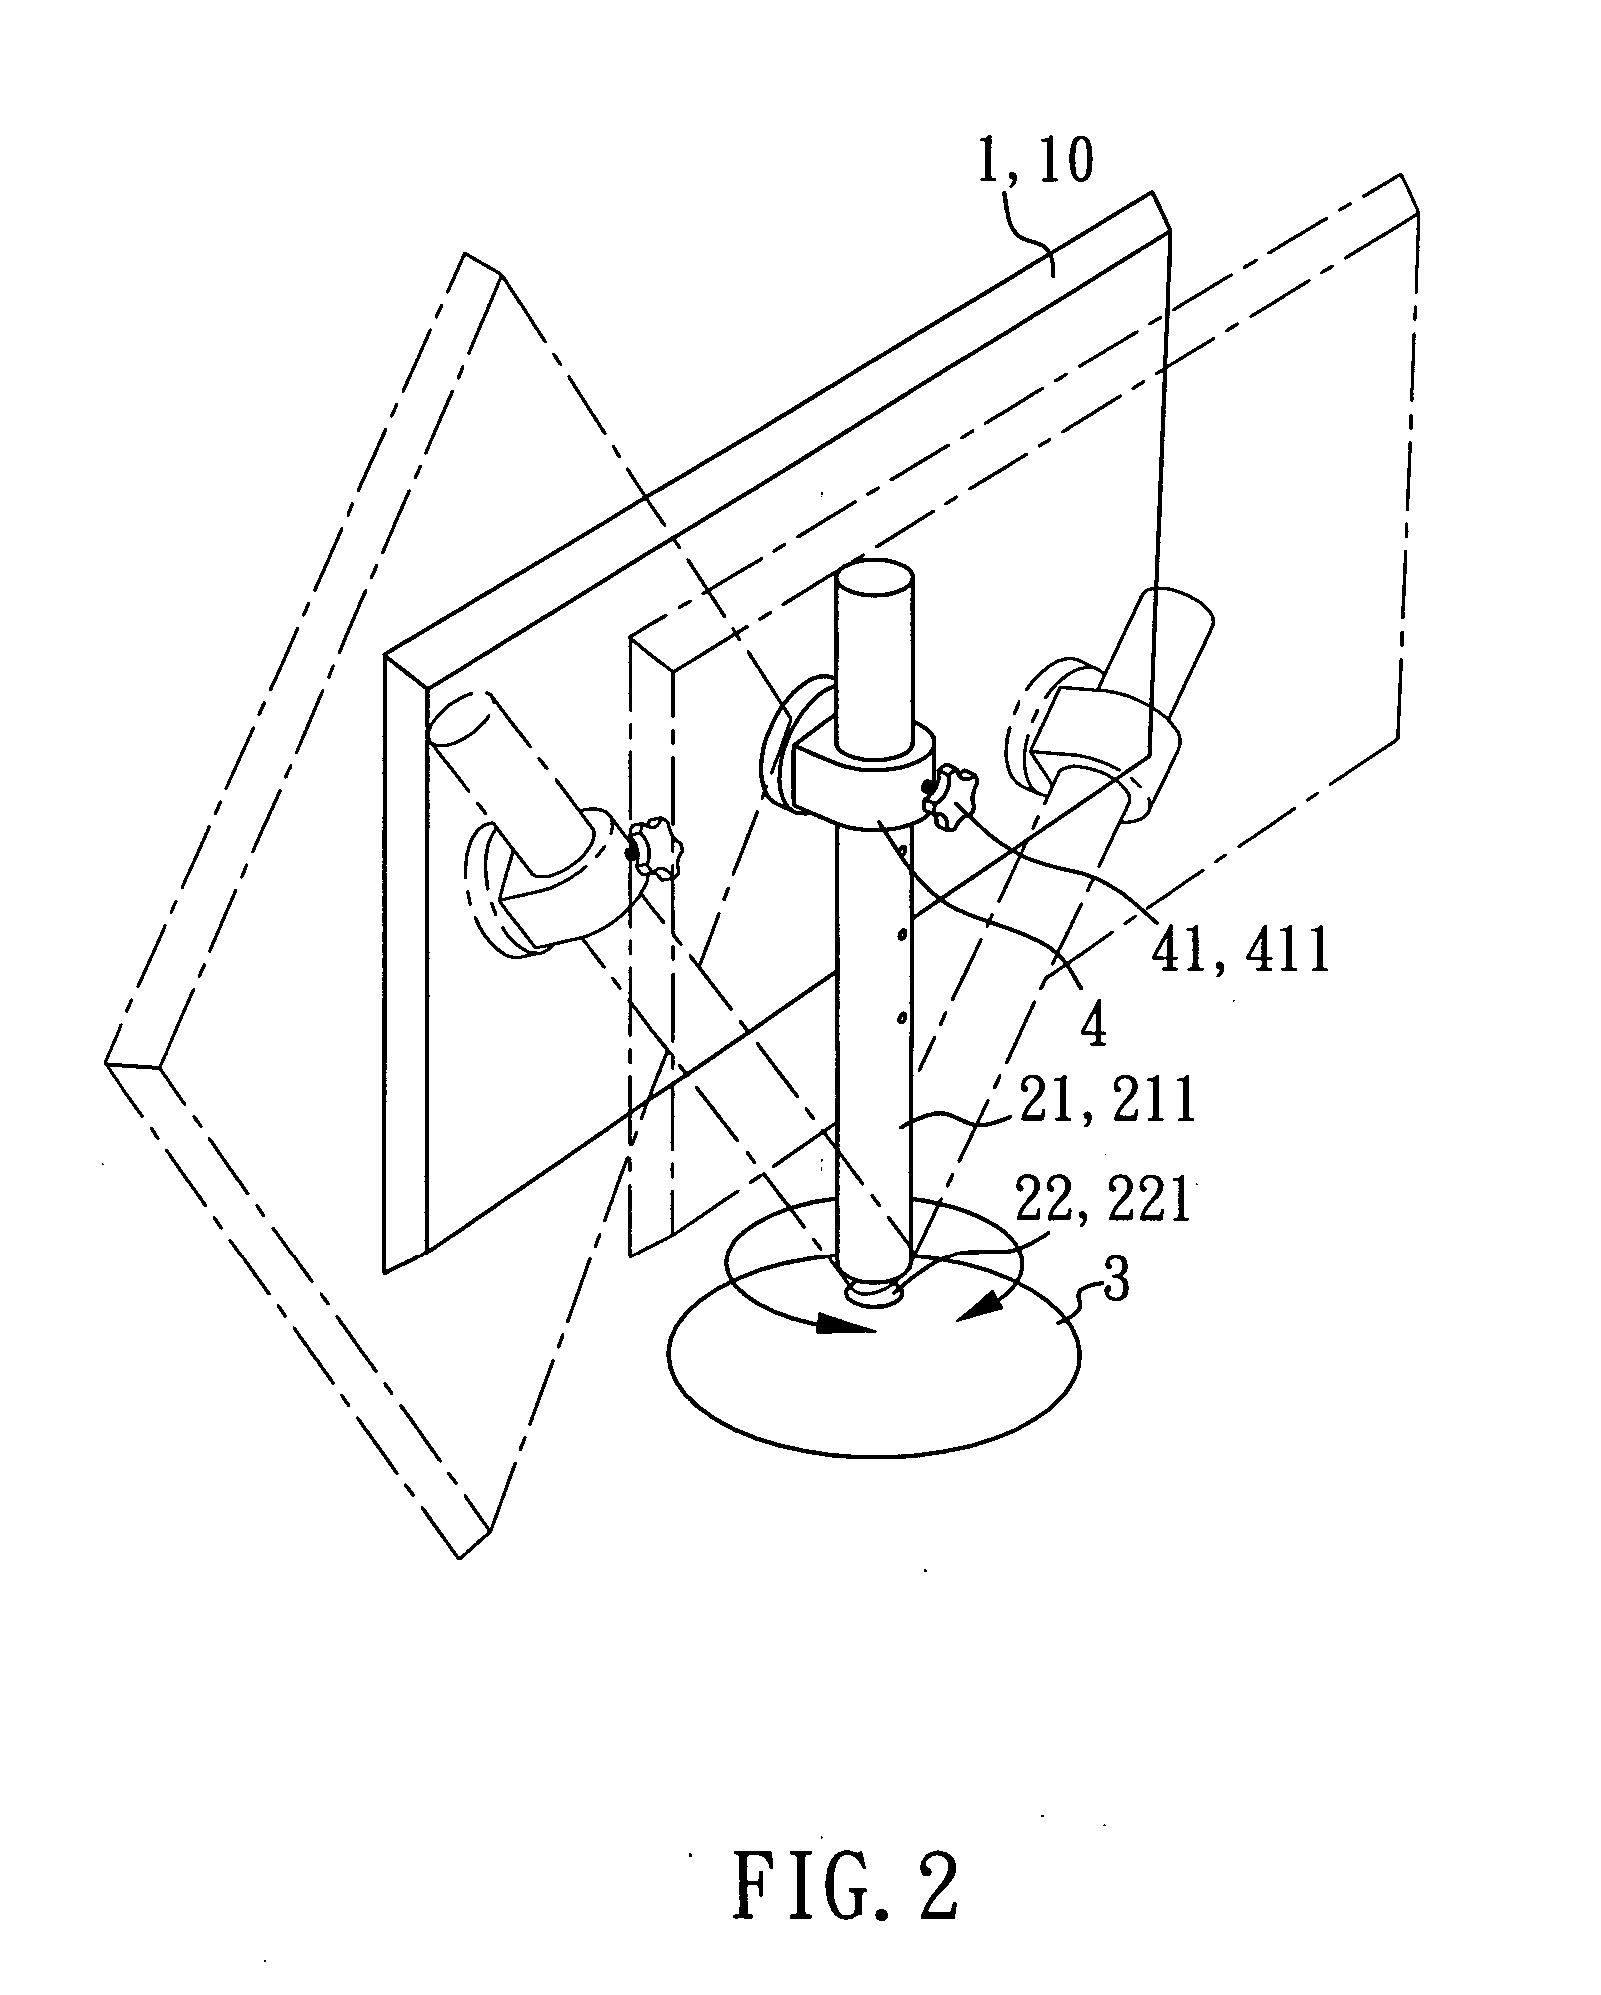 Display with multiple adjustable positions and angles